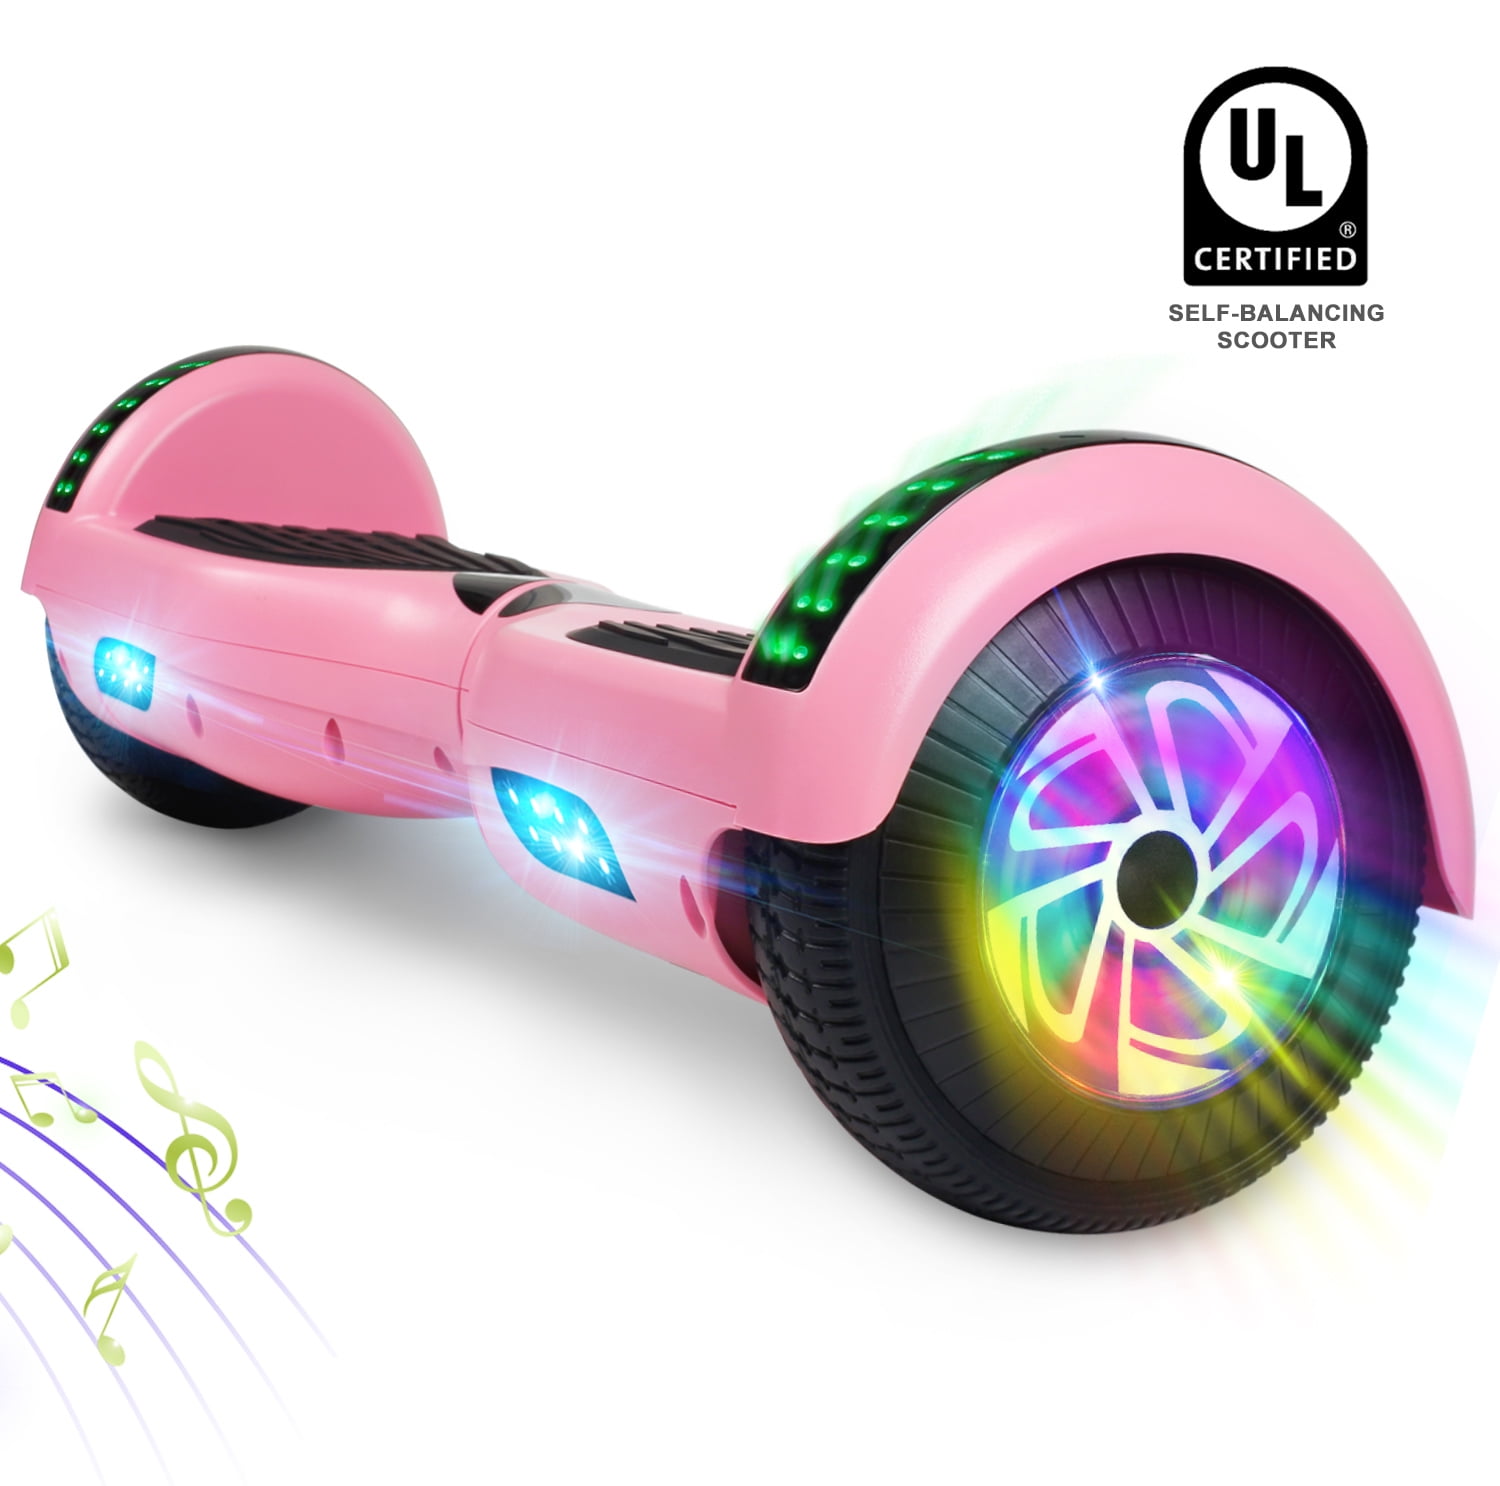 New Hoverboard 6.5 inch w/Bluetooth Speaker and LED Wheels Side Lights UL2272 